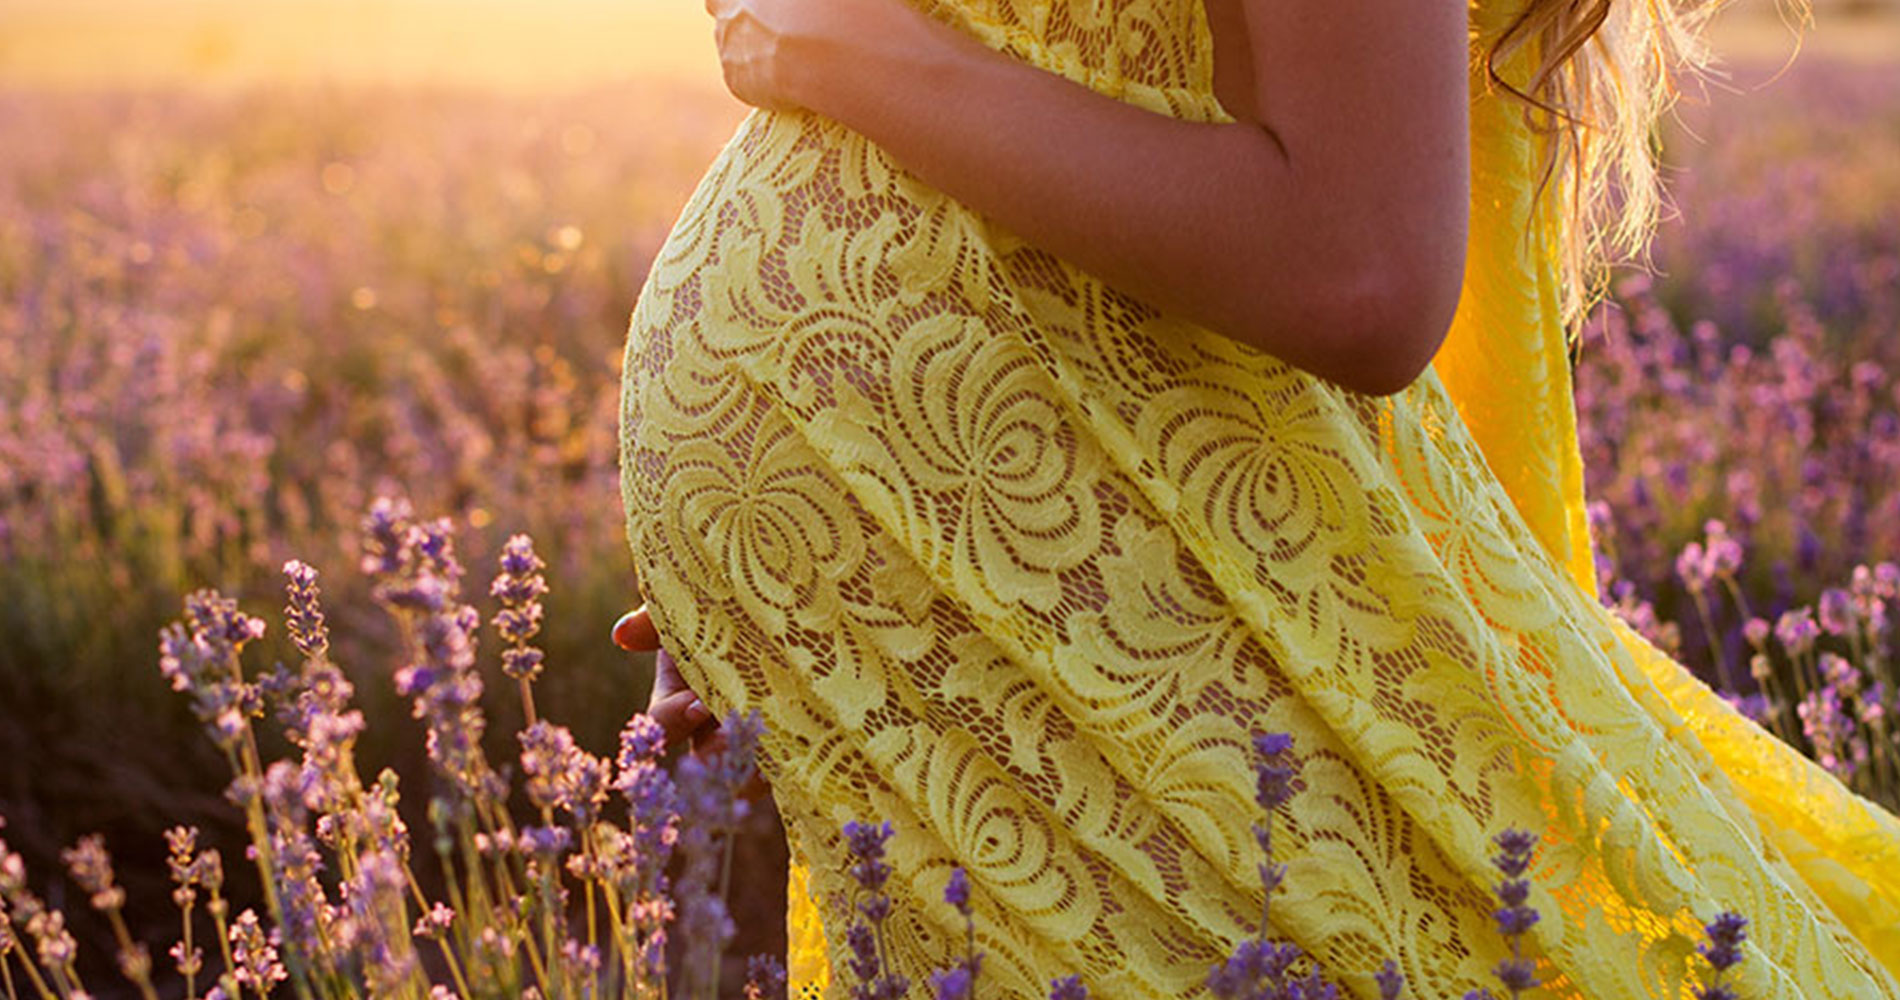 Simple Tips to Ease Pregnancy-Related Back Pain - ProResults